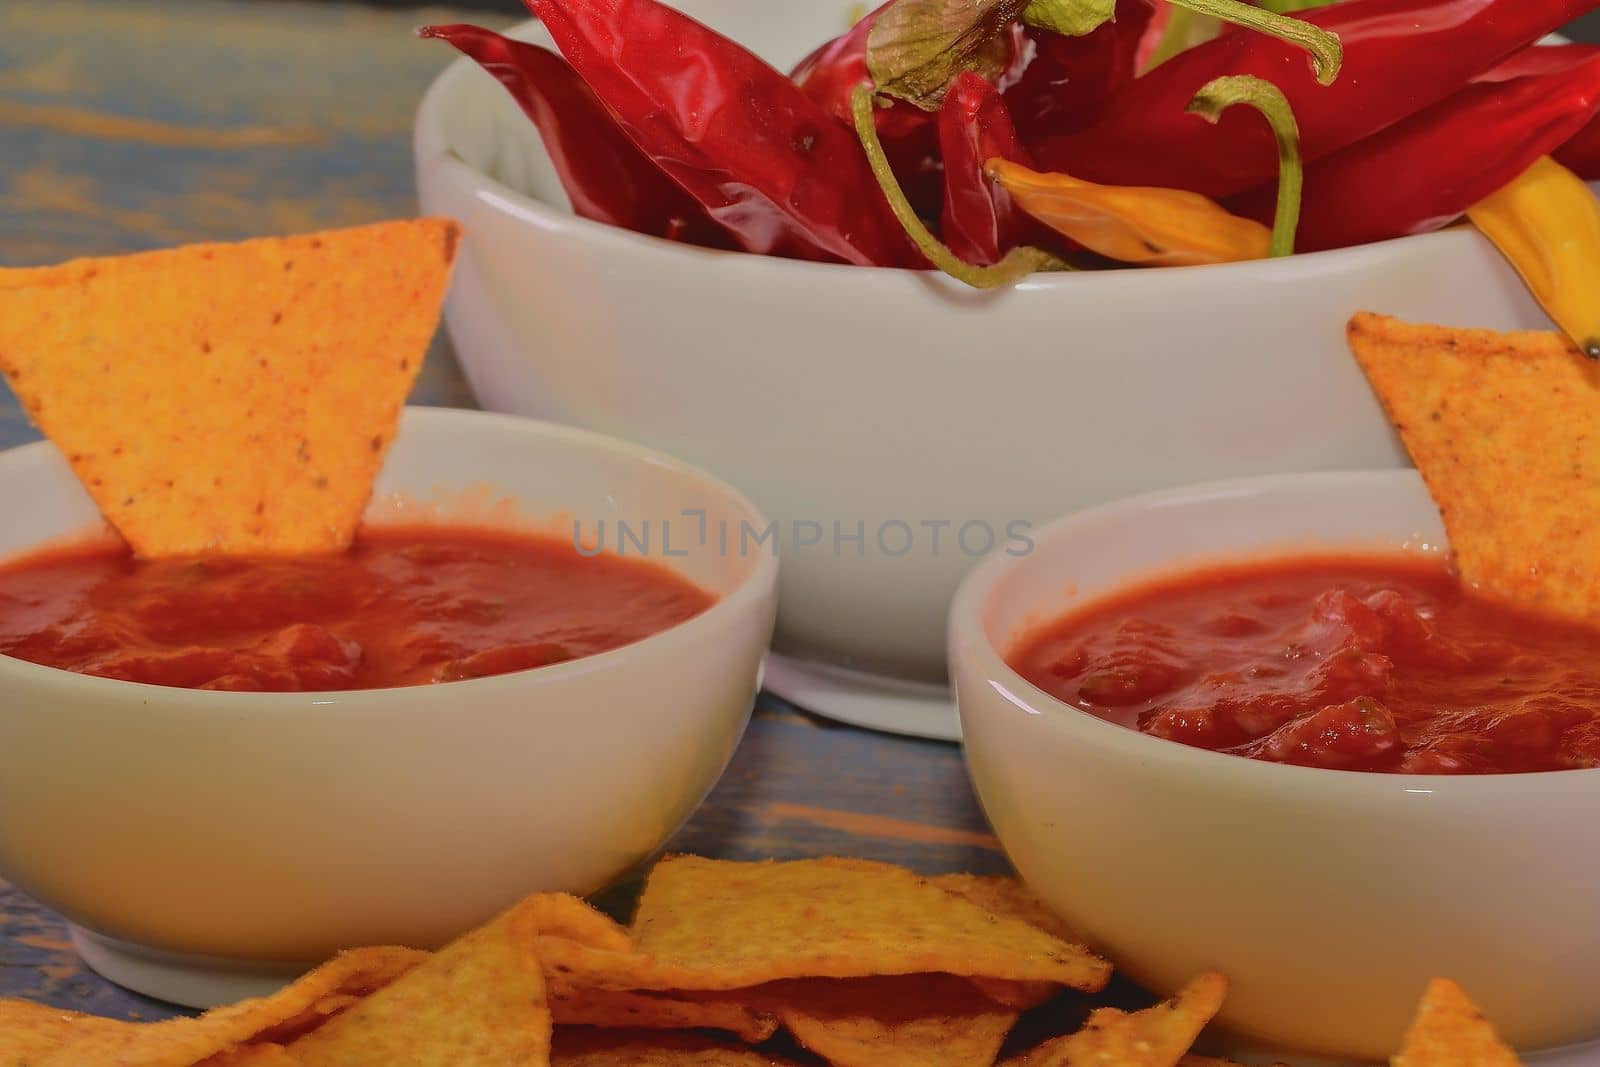 Chili corn-chips with salsa dip and chili peppers on wooden background by roman_nerud